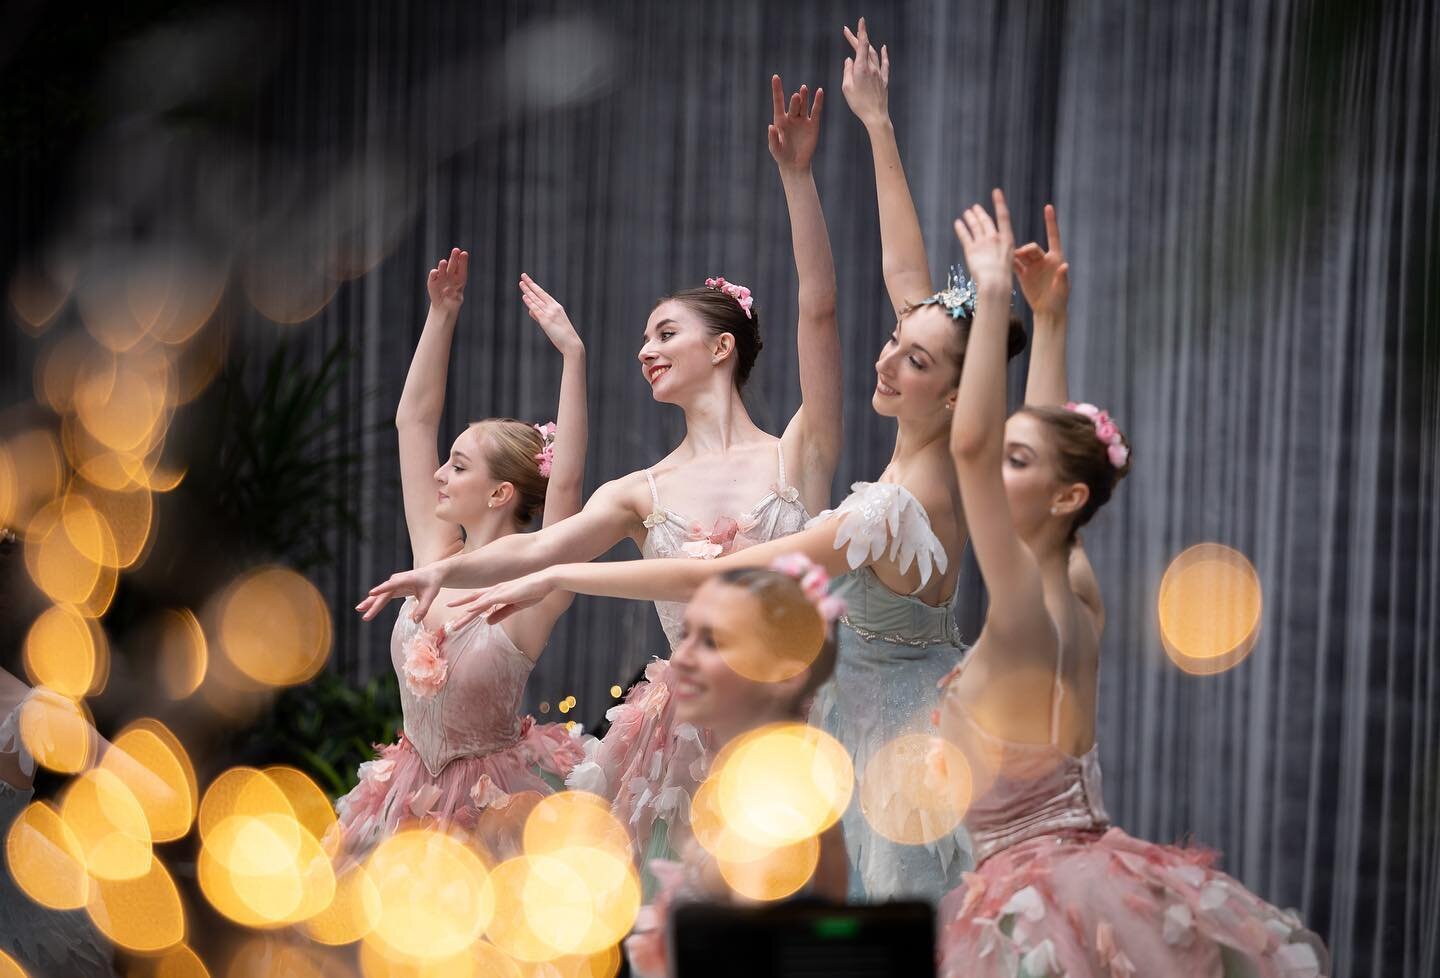 Speaking of a winter celebration at SAAM (Smithsonian @americanart Museum), the Nutcracker Family Day was the previous holiday event that I photographed, back in 2019. @thewashingtonballet dancers performed parts of The Nutcracker and taught the ball